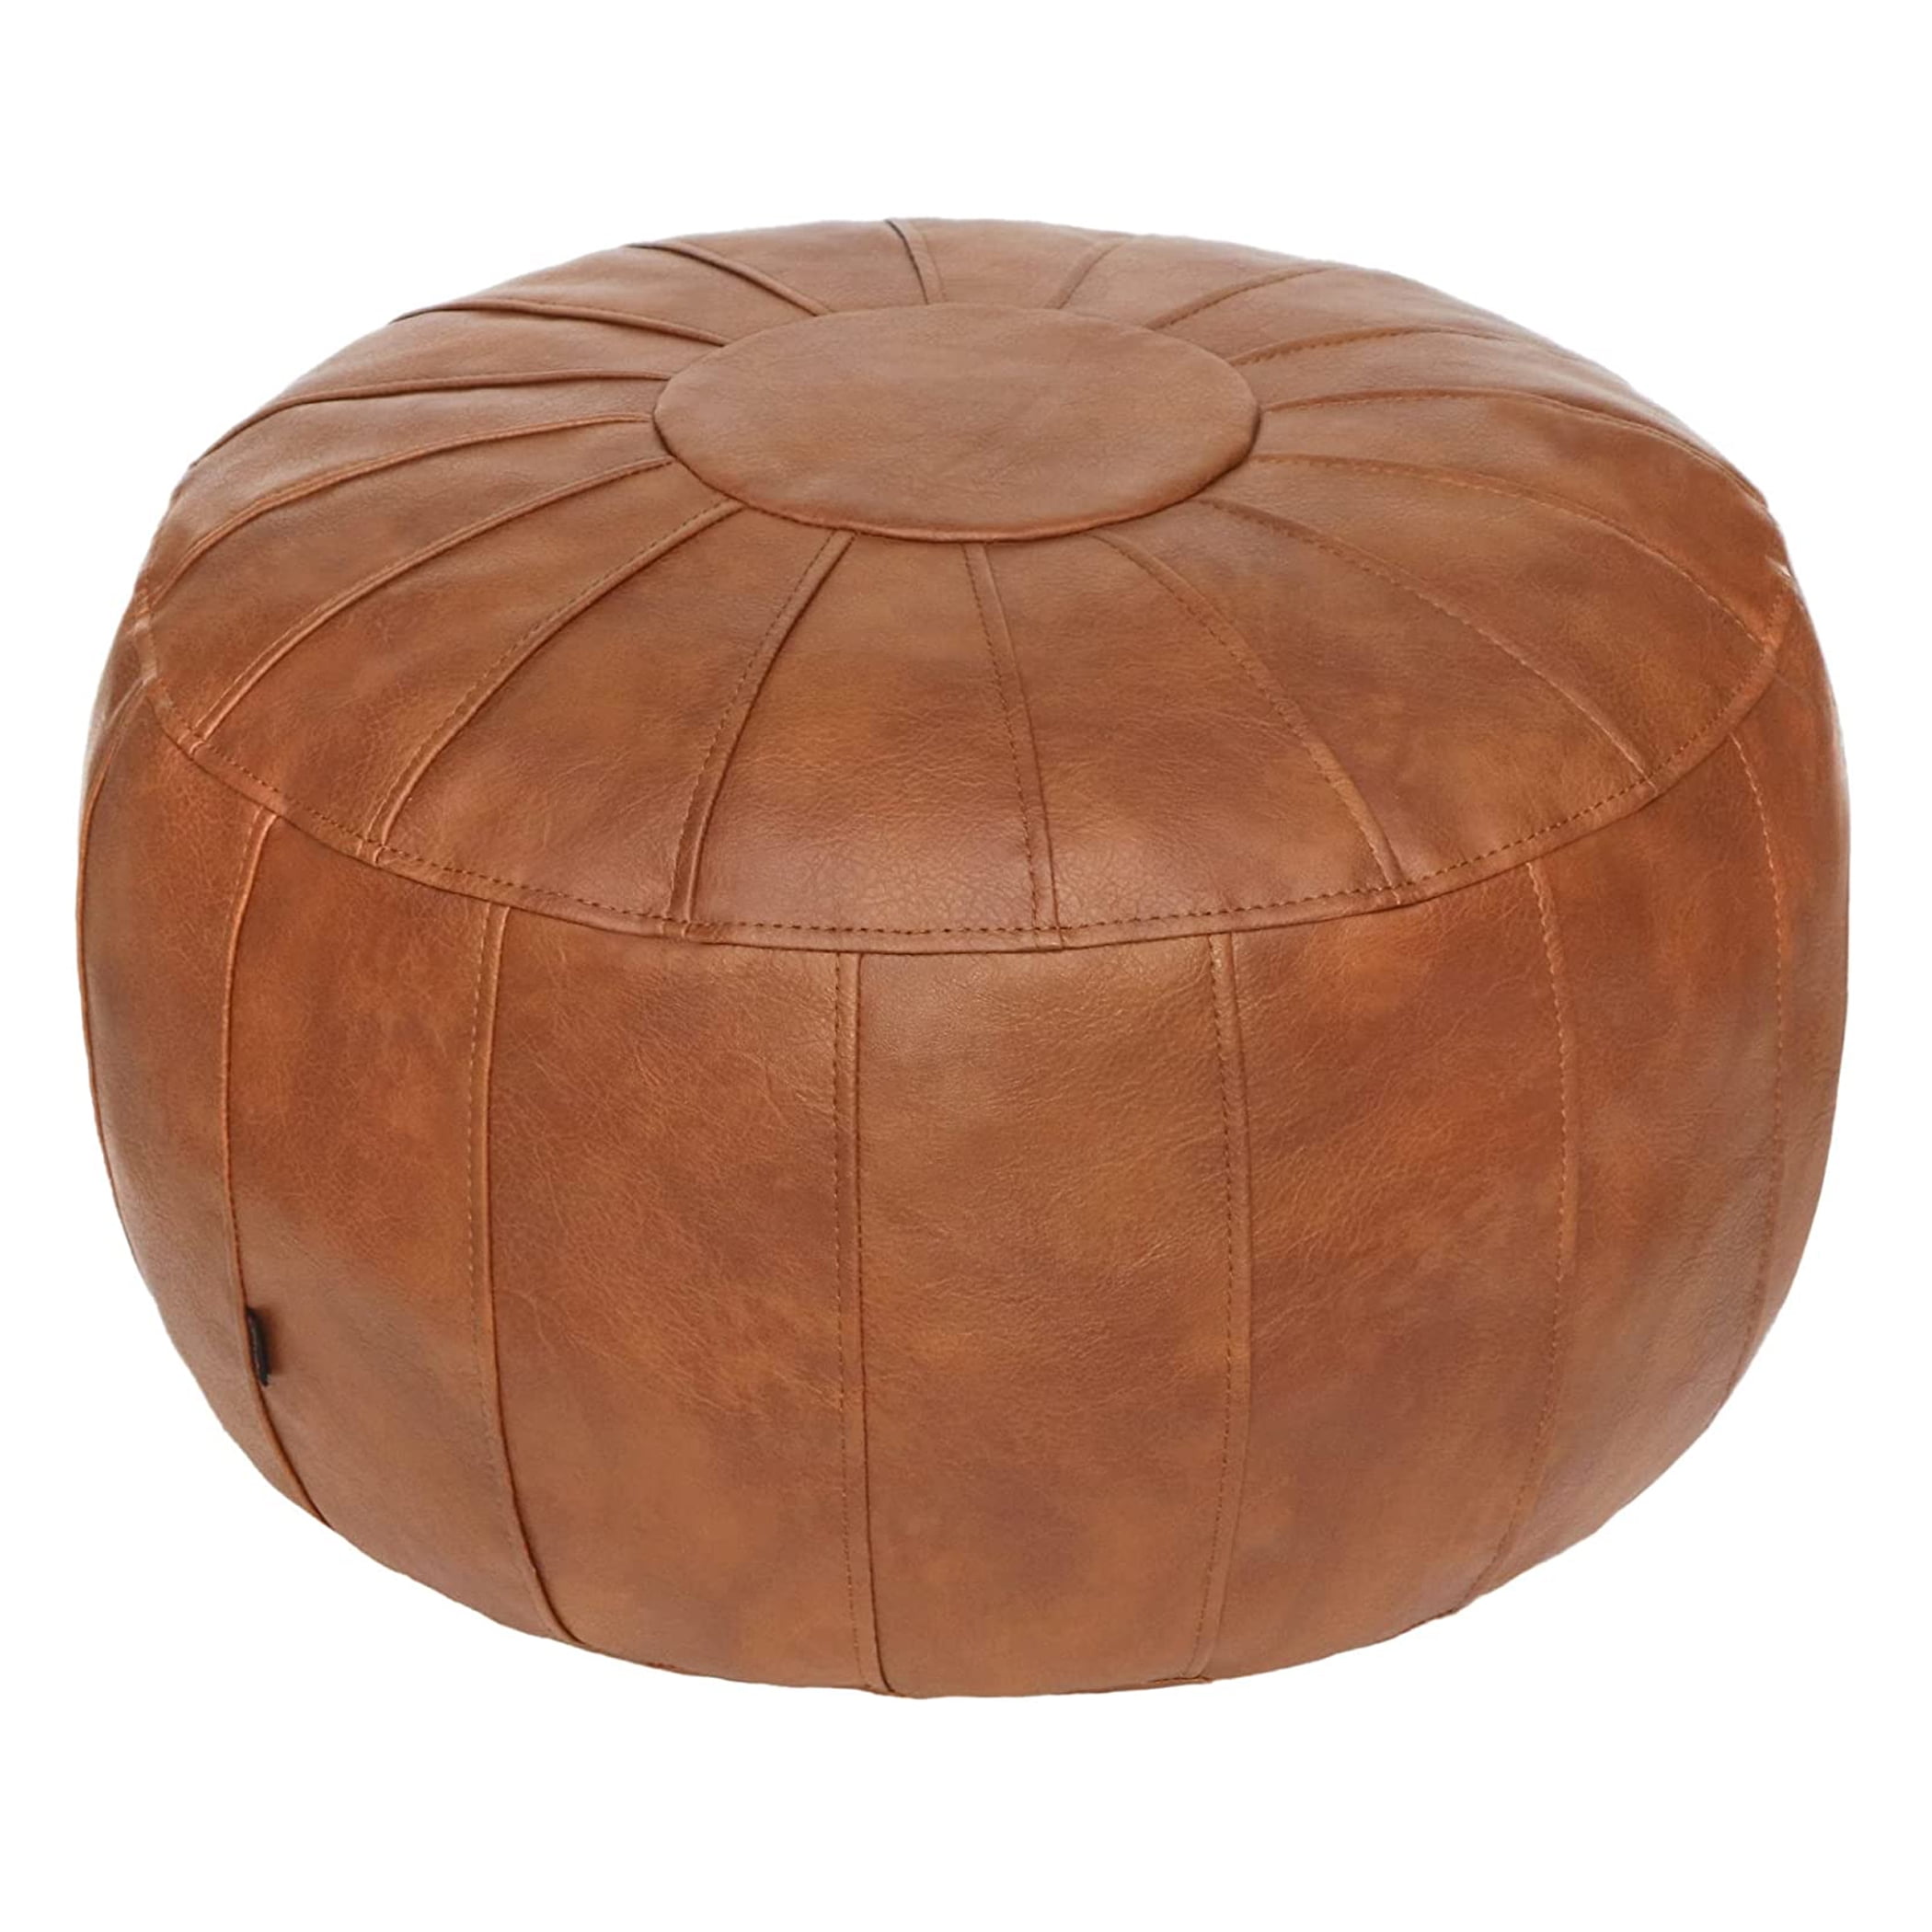 Thgonwid 21.7*13.7 inch Indoor Vegan Leather Pouf, Light Brown (Comes with  No Filler) 